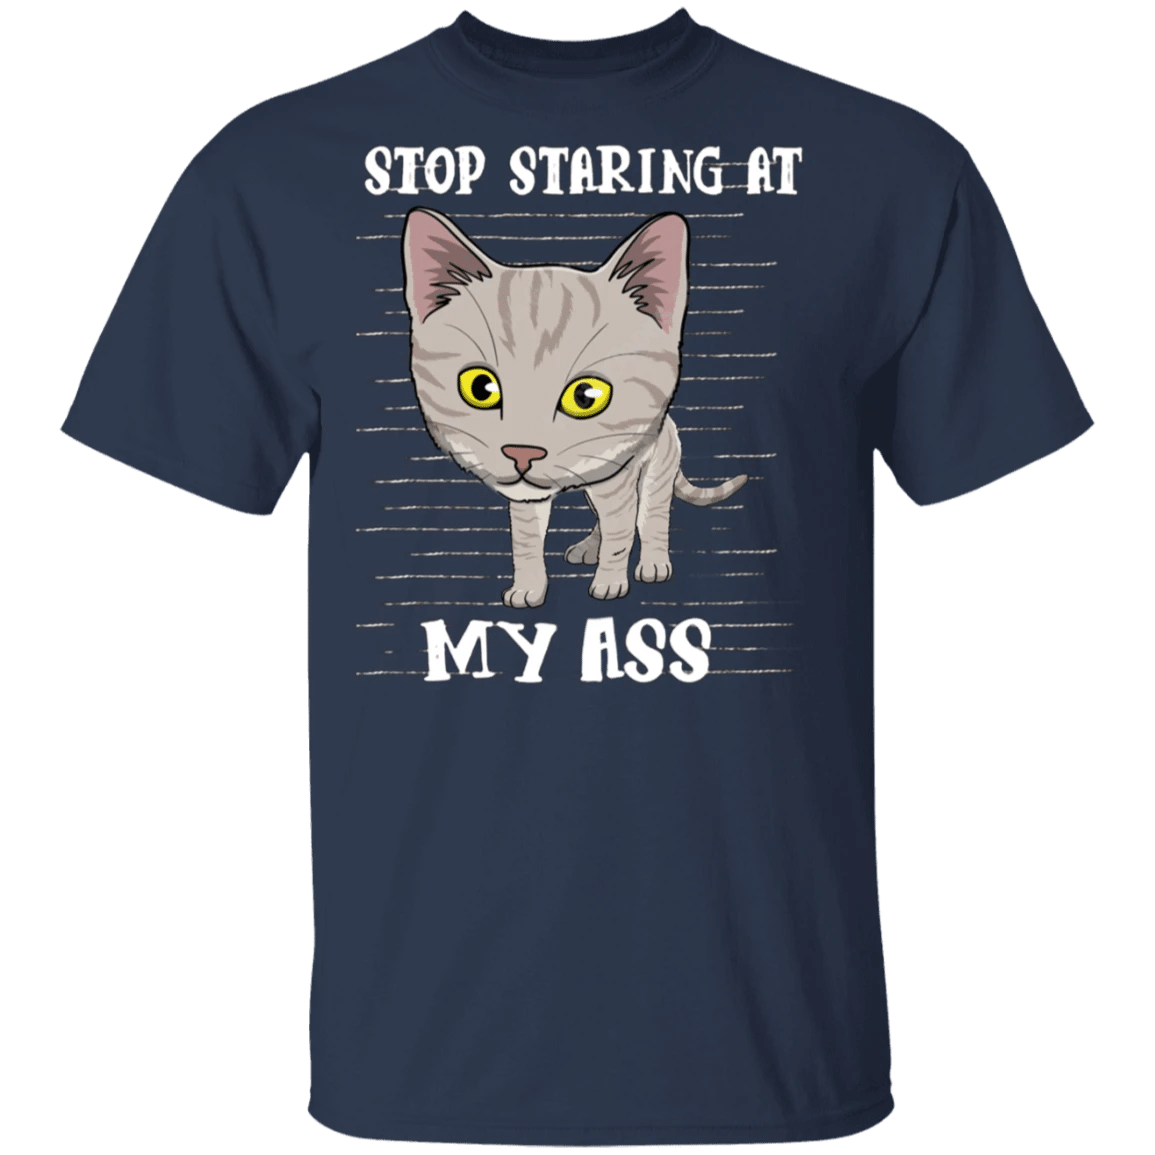 Stop Staring At My Ass Cat Shirts Funny